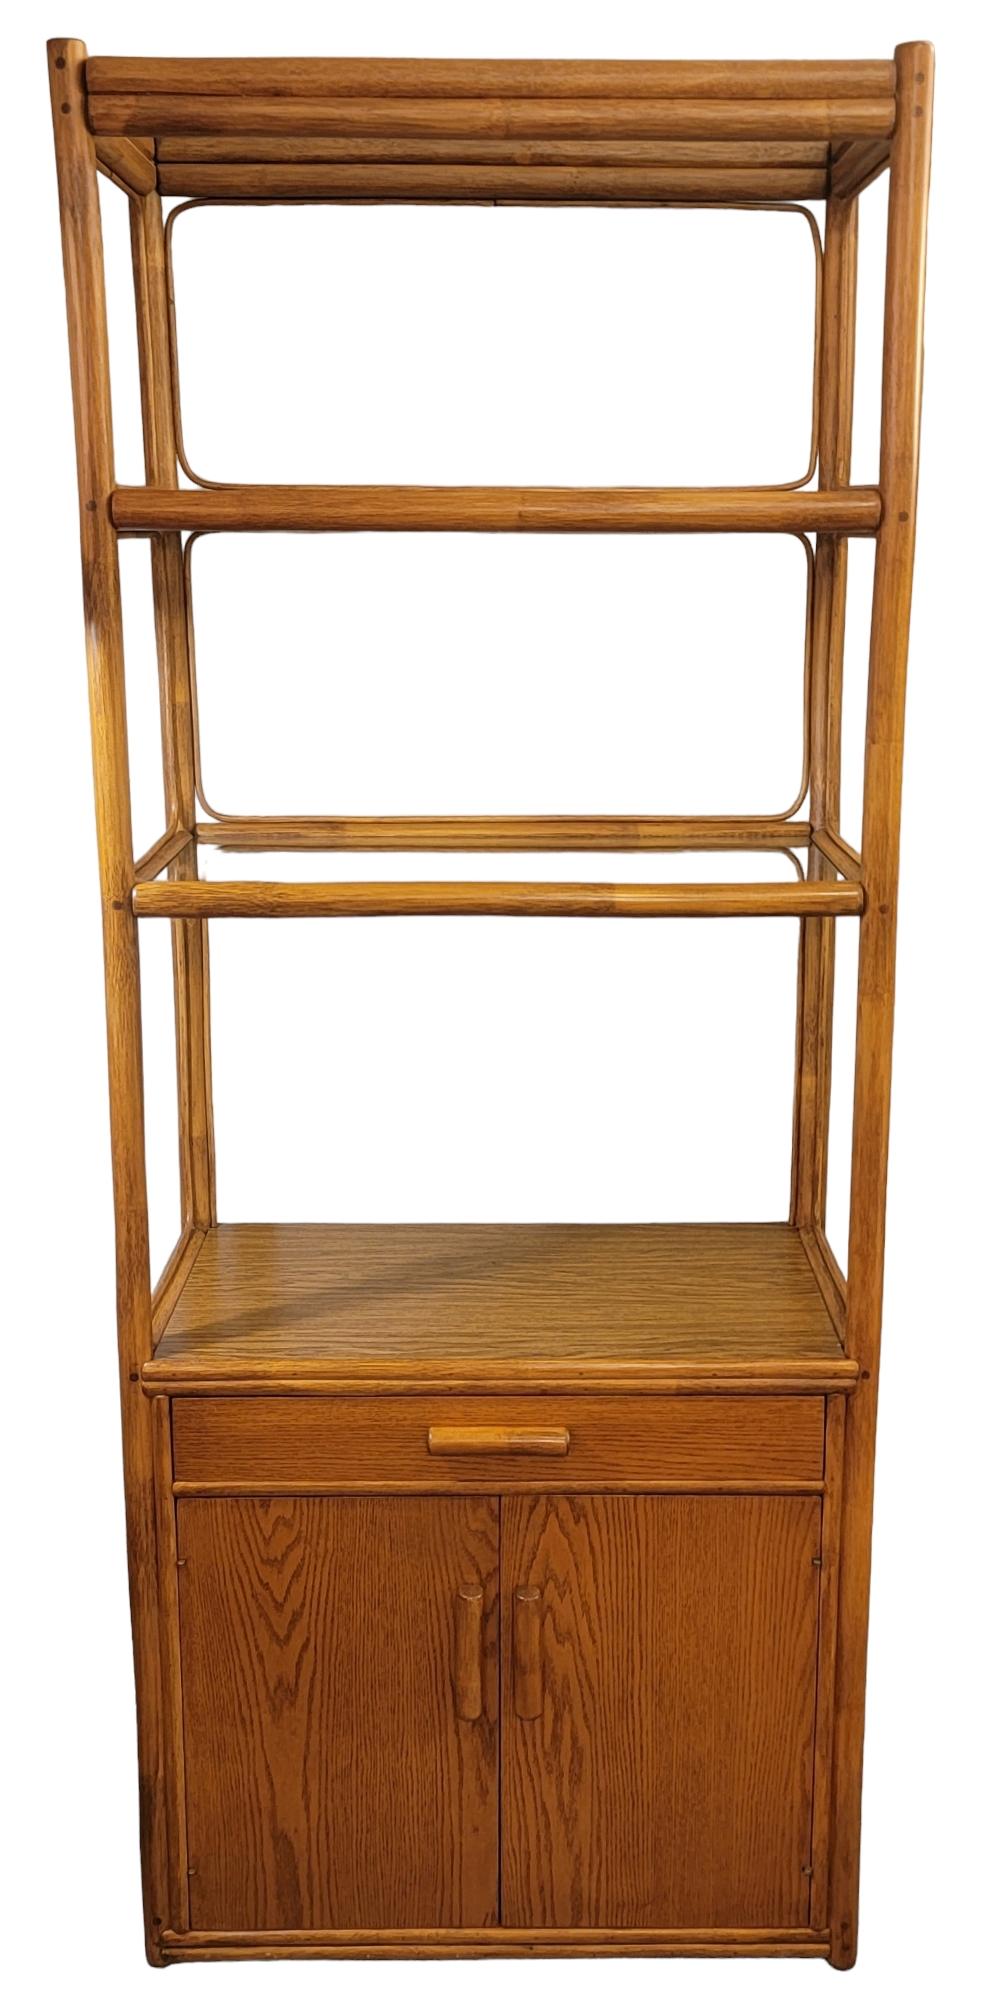 Three Tier Bamboo Shelf with two door storage compartment that has a shelf within. This bamboo shelf is a strong yet light weight etagere, there are 2 glass shelves and one of the glass shelves has a very minor crack to it. It does not hinder the